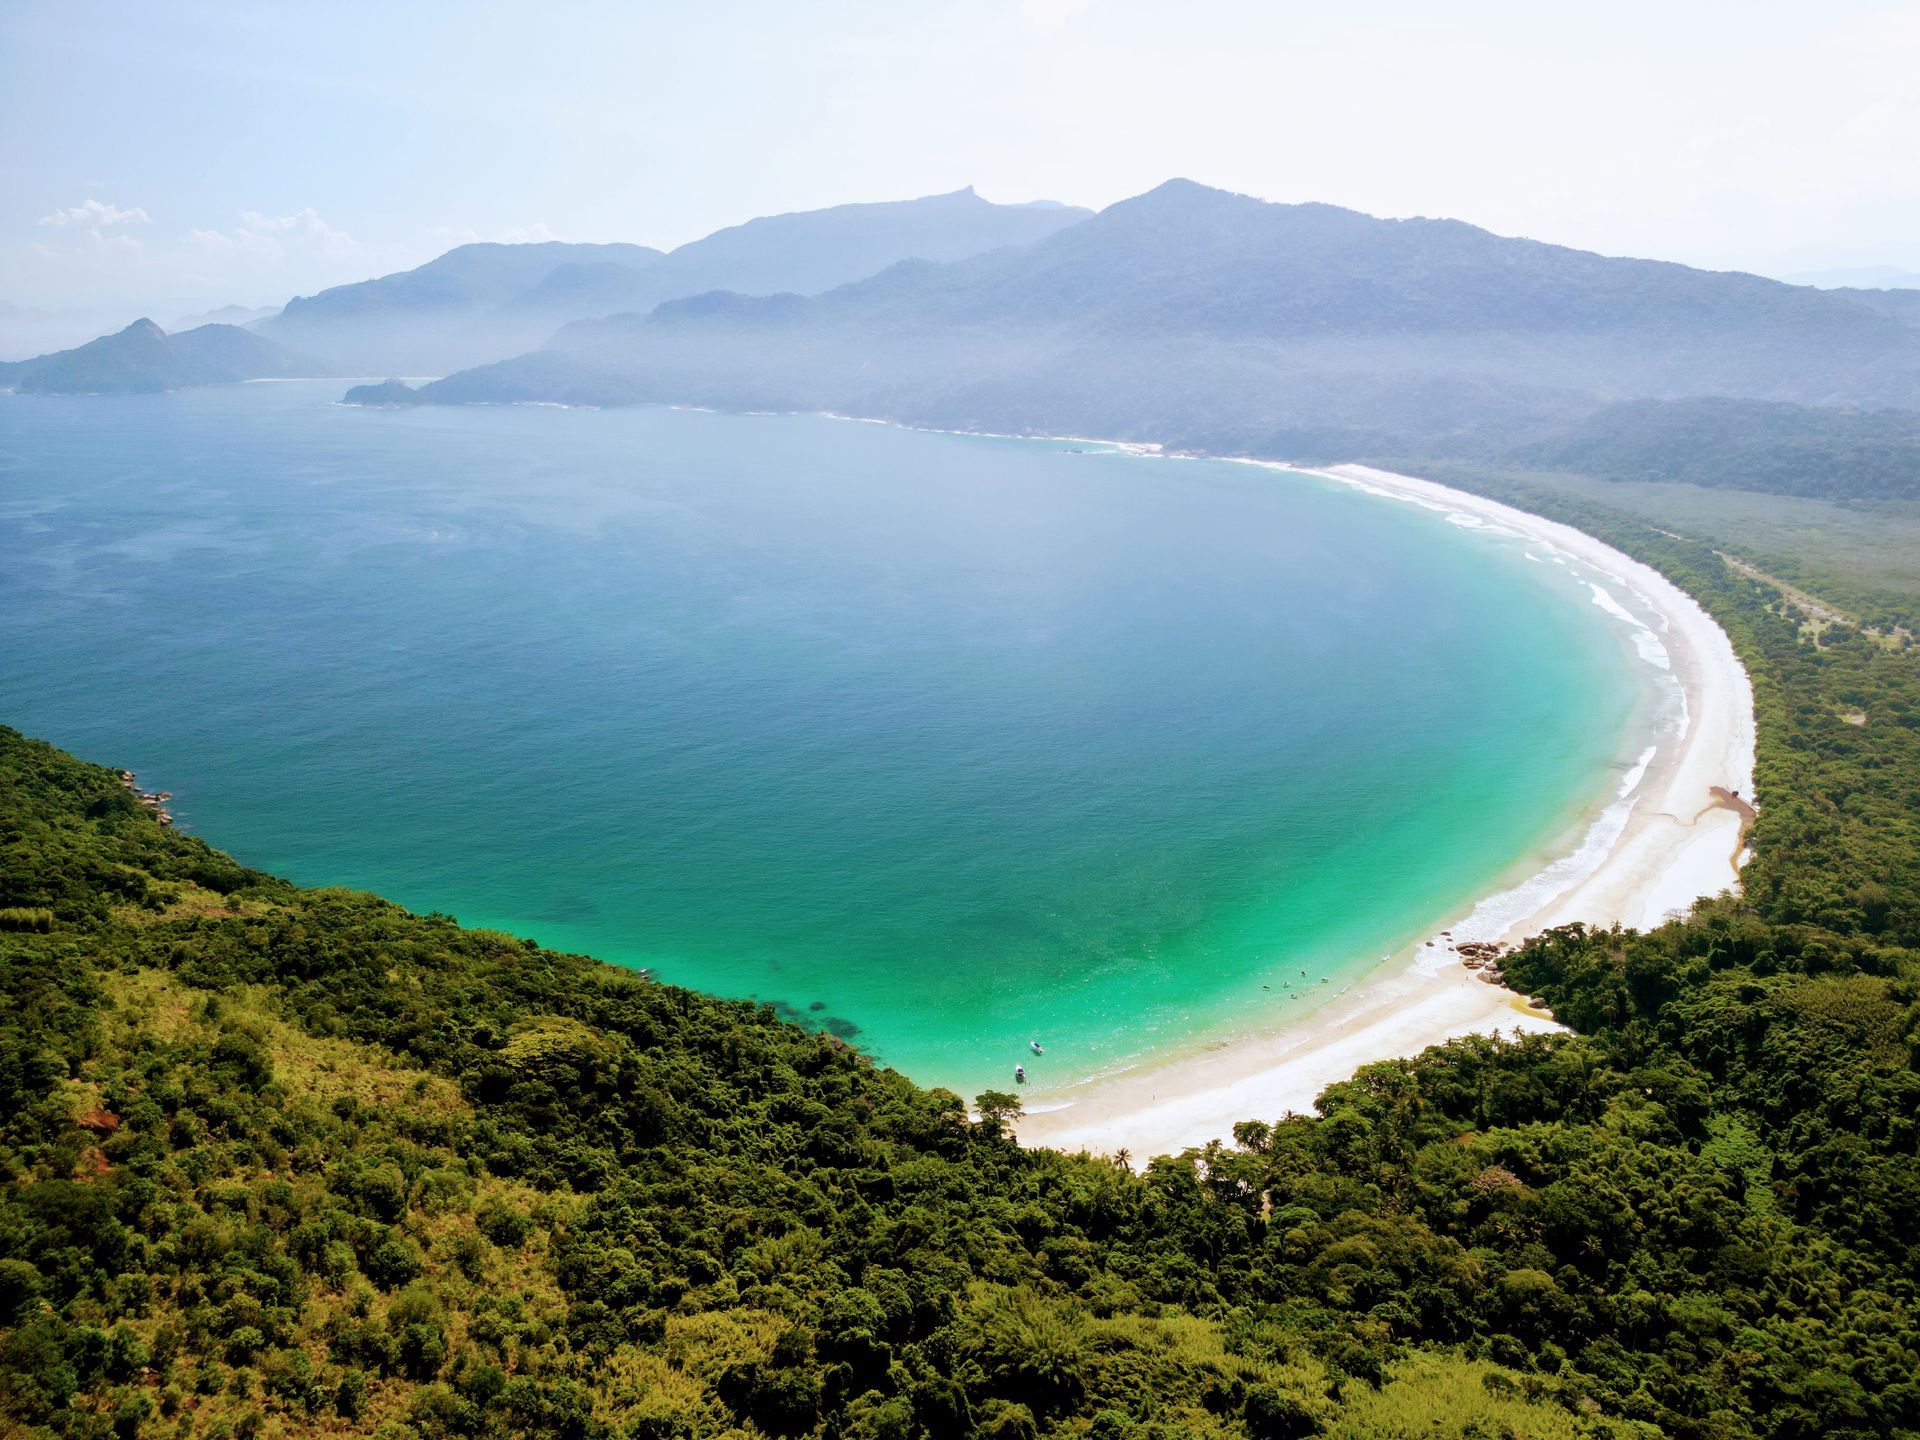 Lopes Mendes Beach from above - Elected one of the best beaches in the world